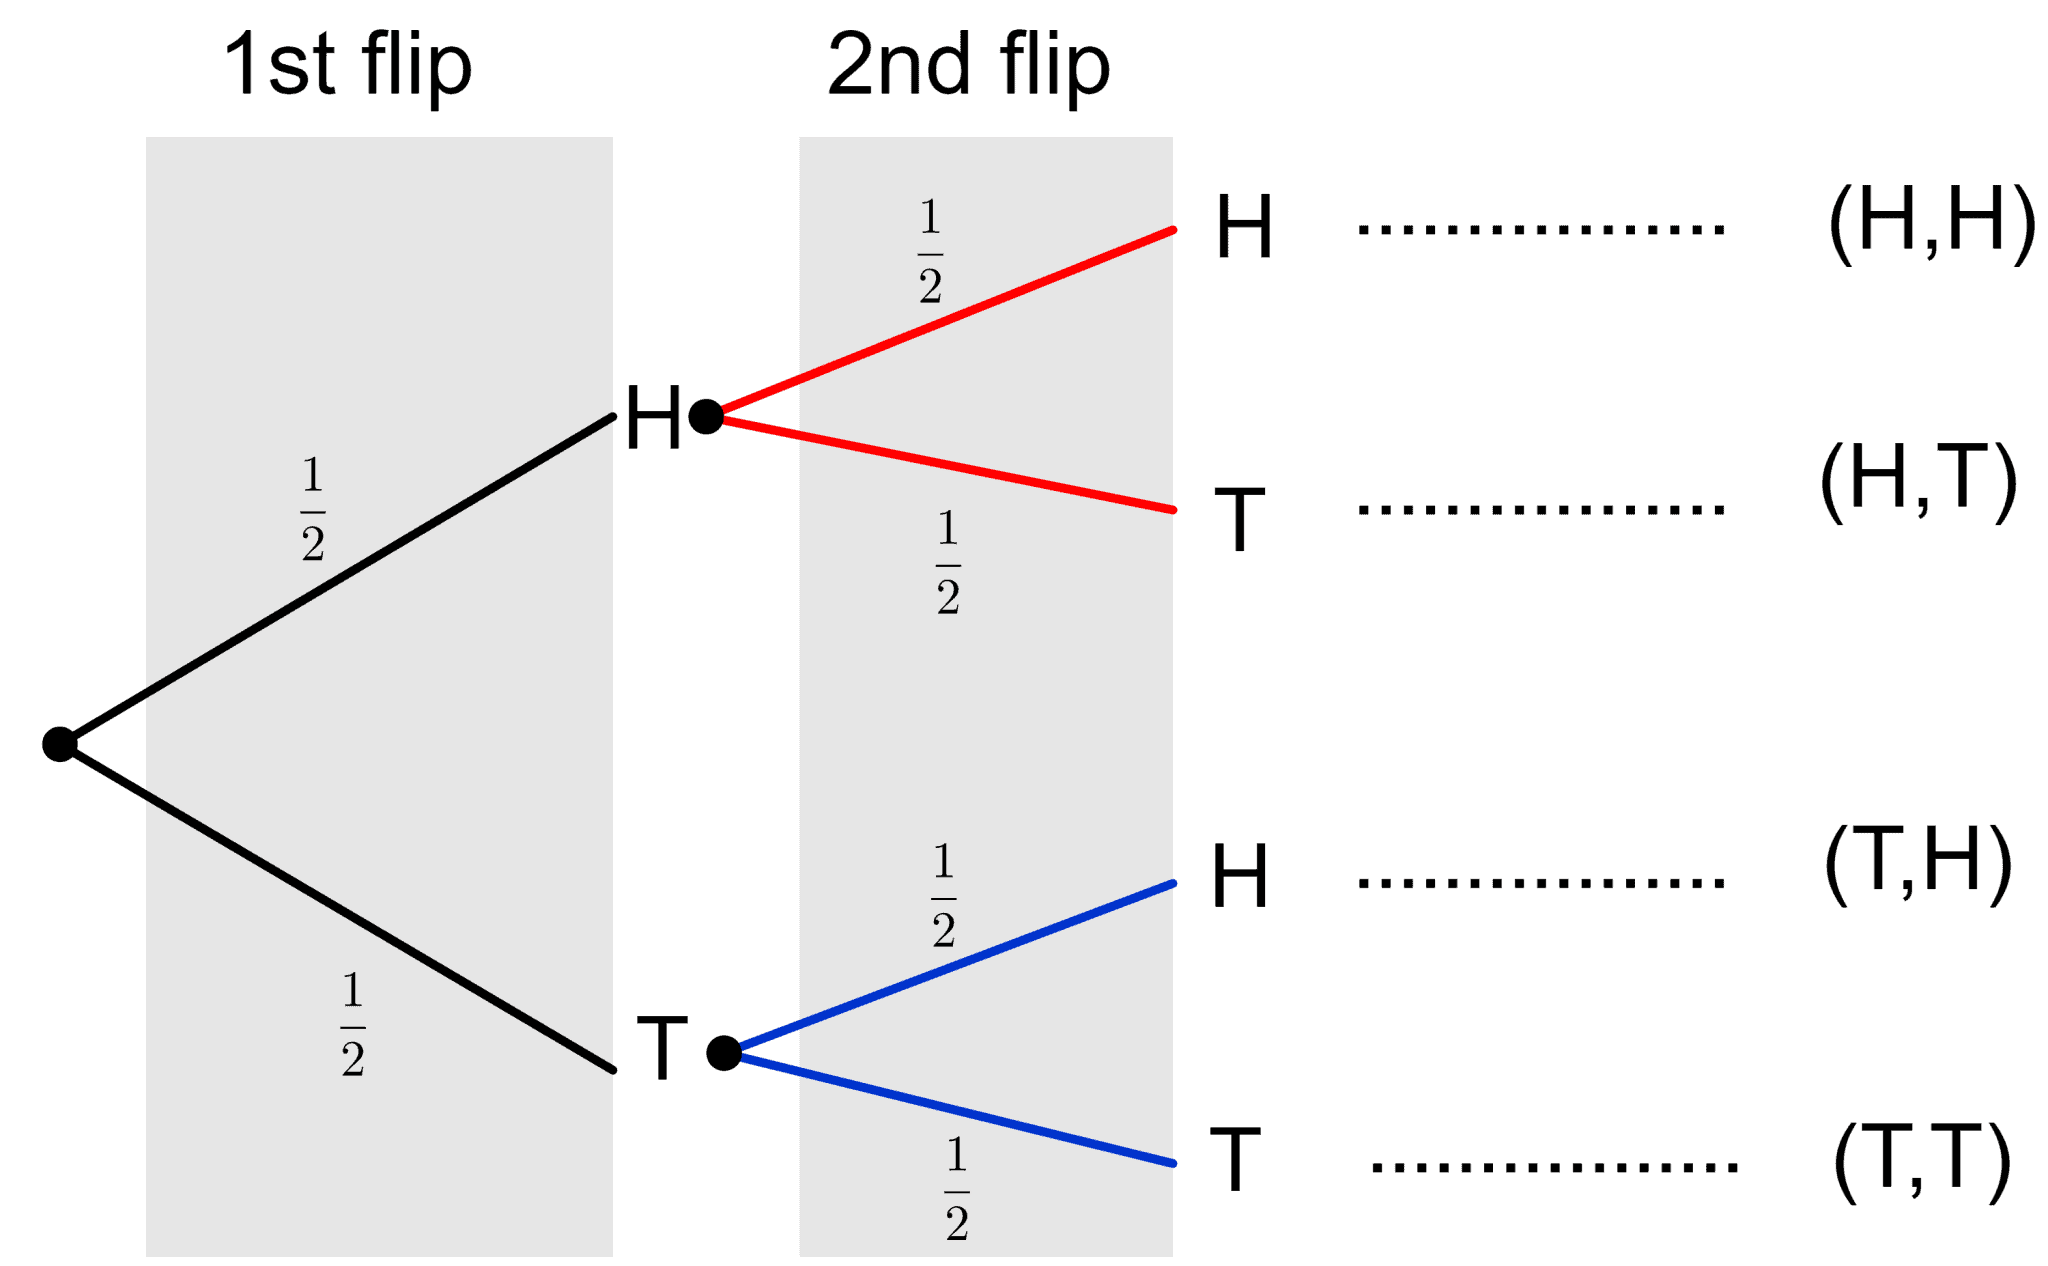 Finally, we can make a complete tree diagram of the two coin flips, as